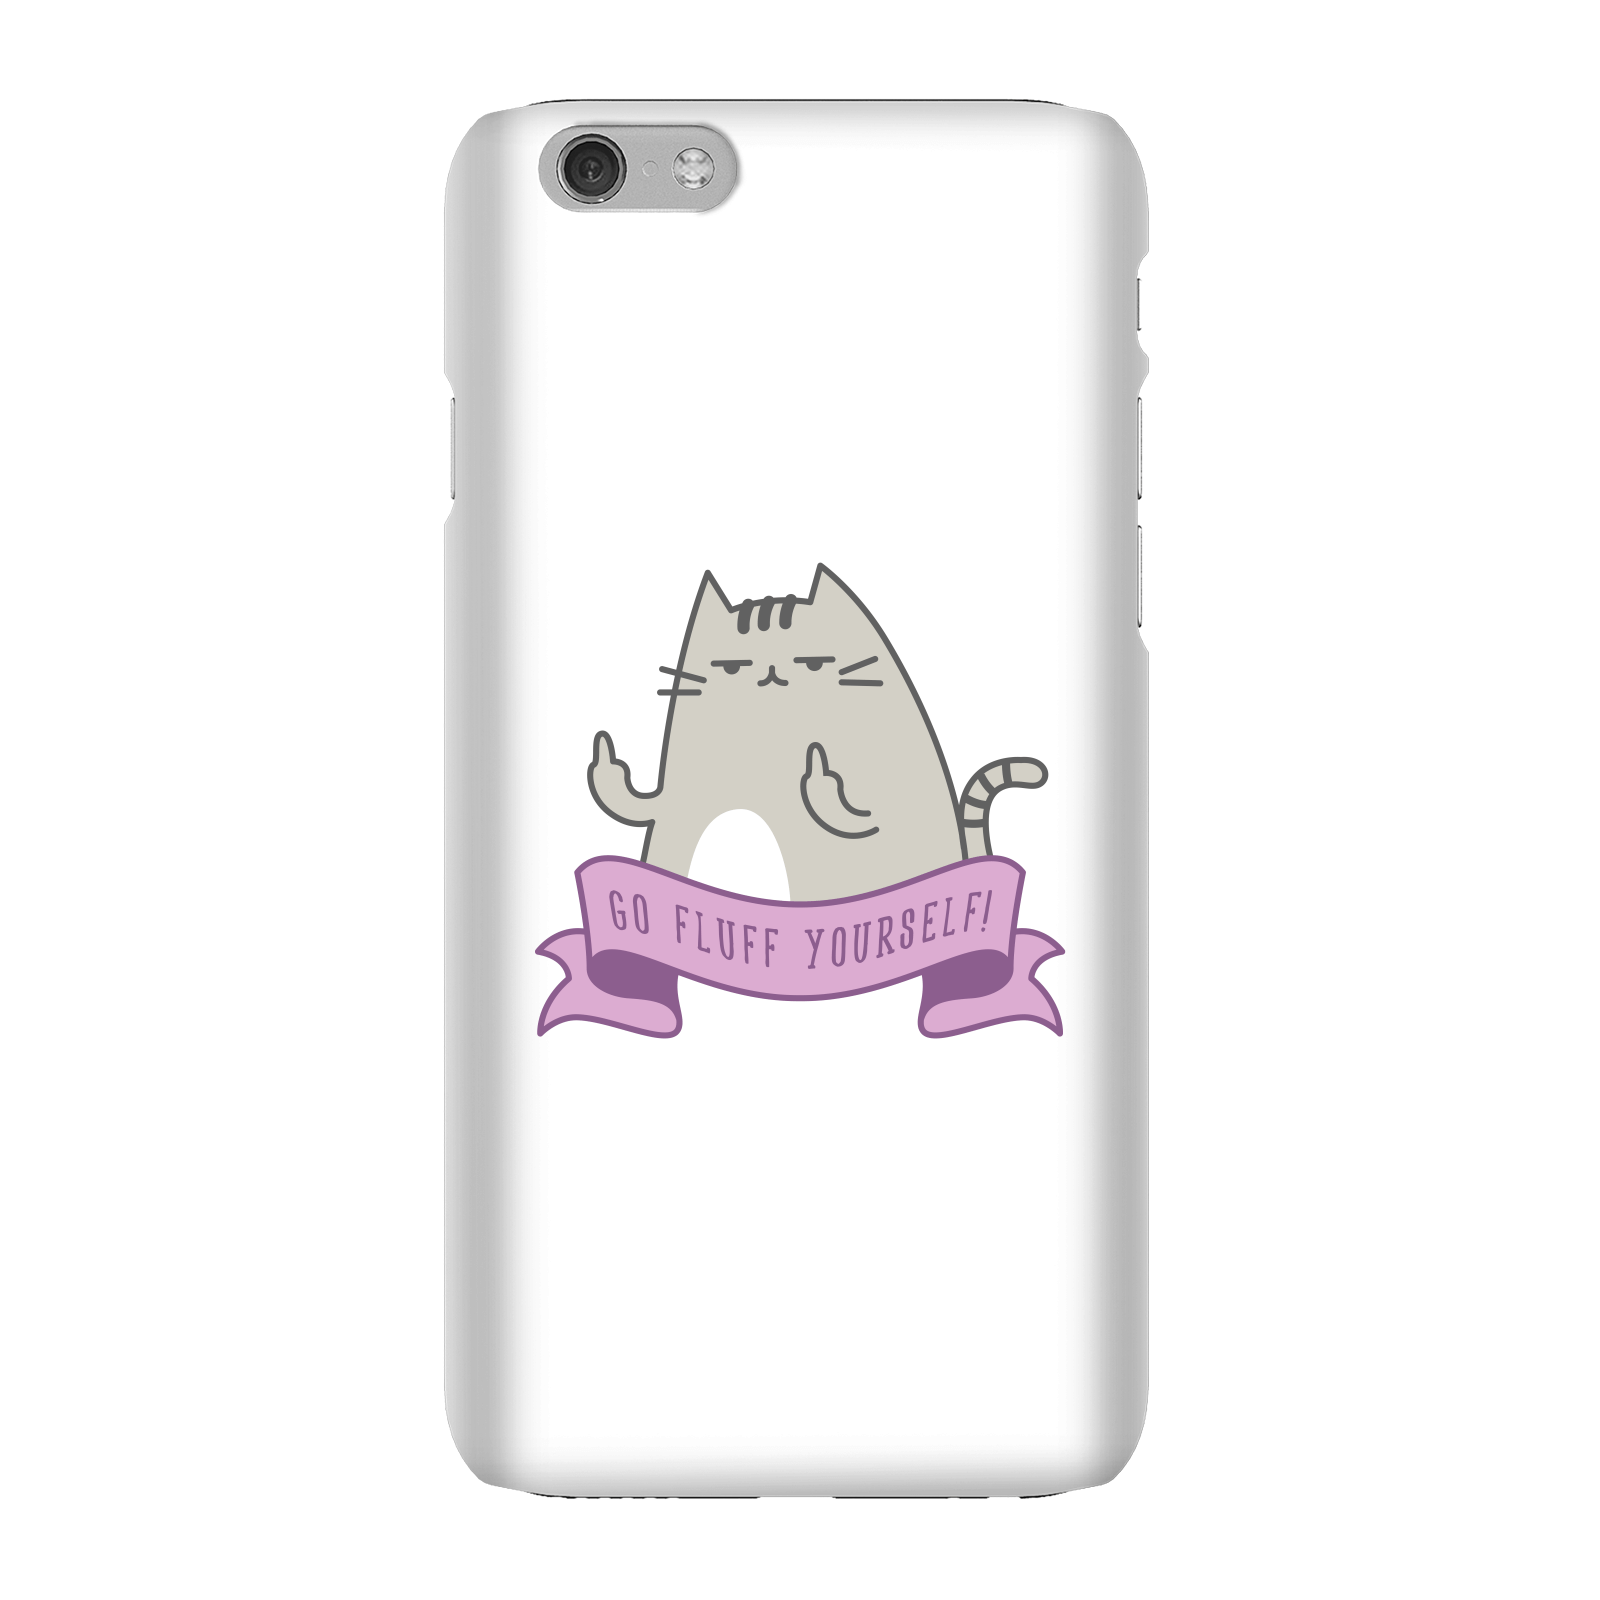 Go Fluff Yourself! Phone Case for iPhone and Android - iPhone 6 - Snap Case - Matte